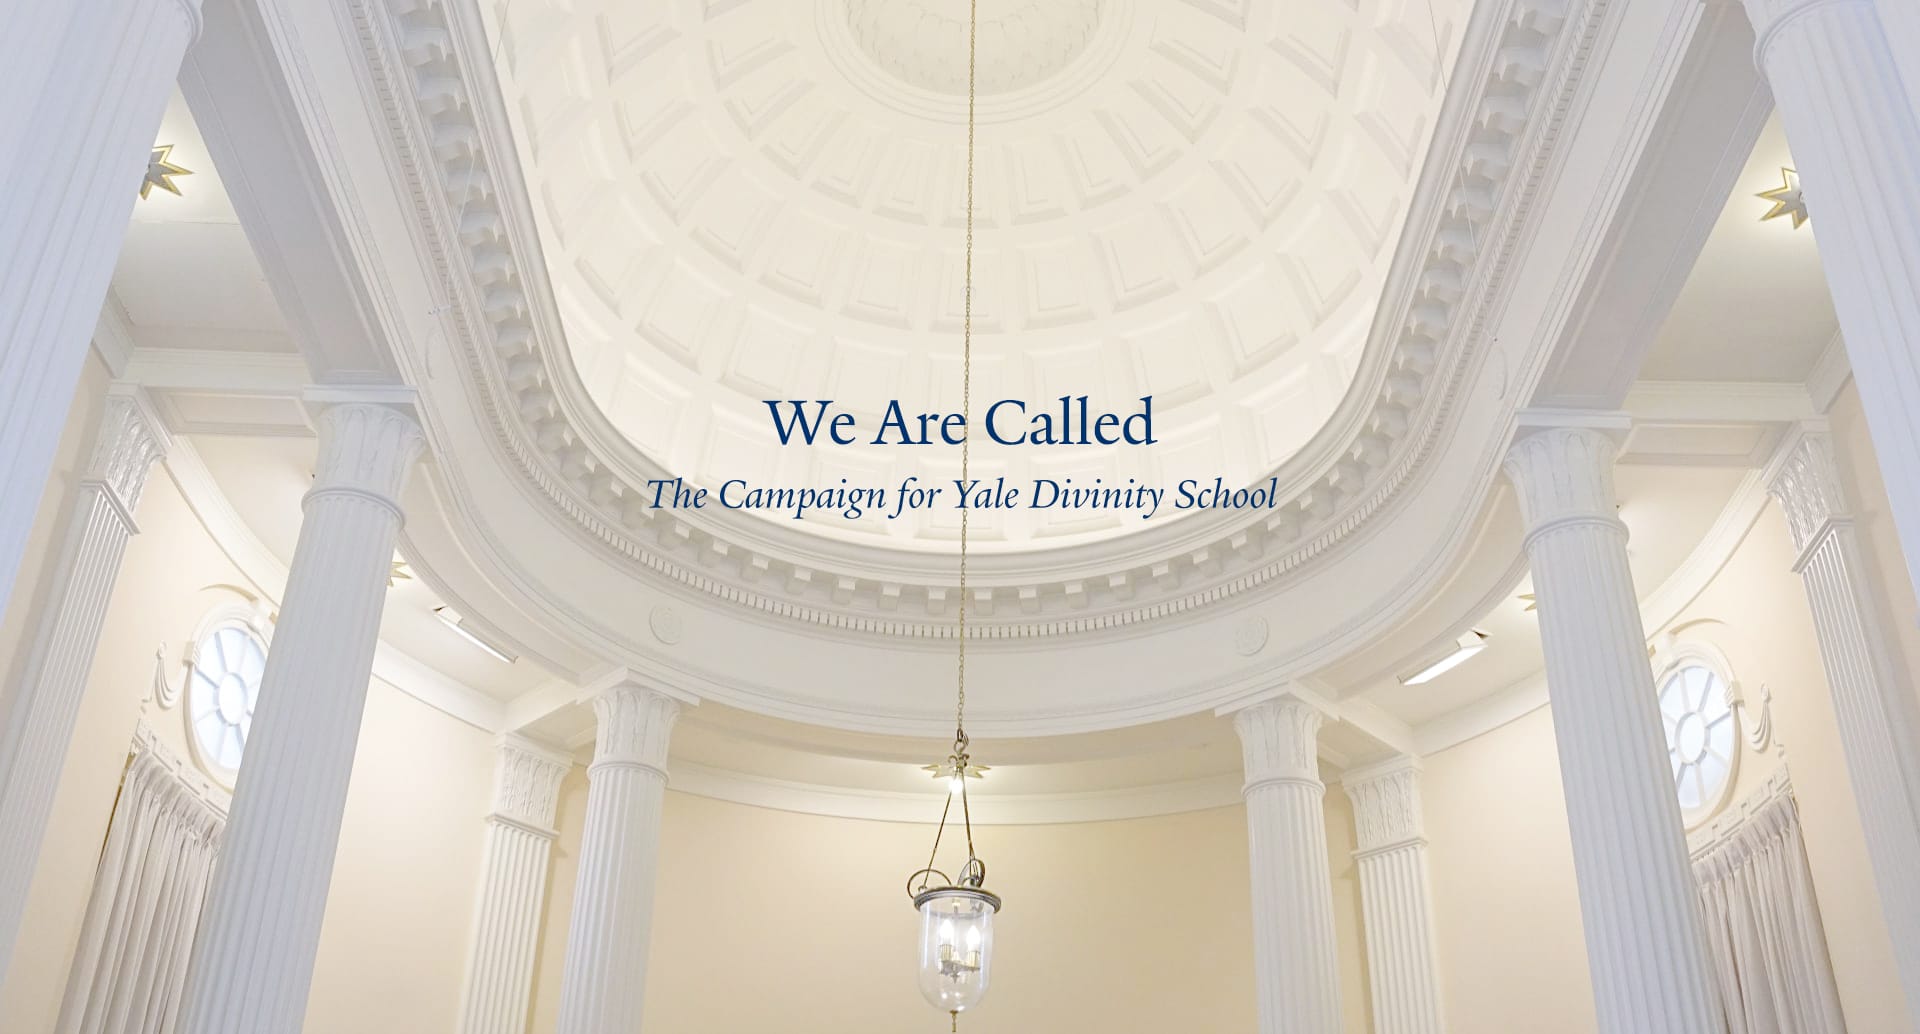 We Are Called - The Campaign for Yale Divinity School